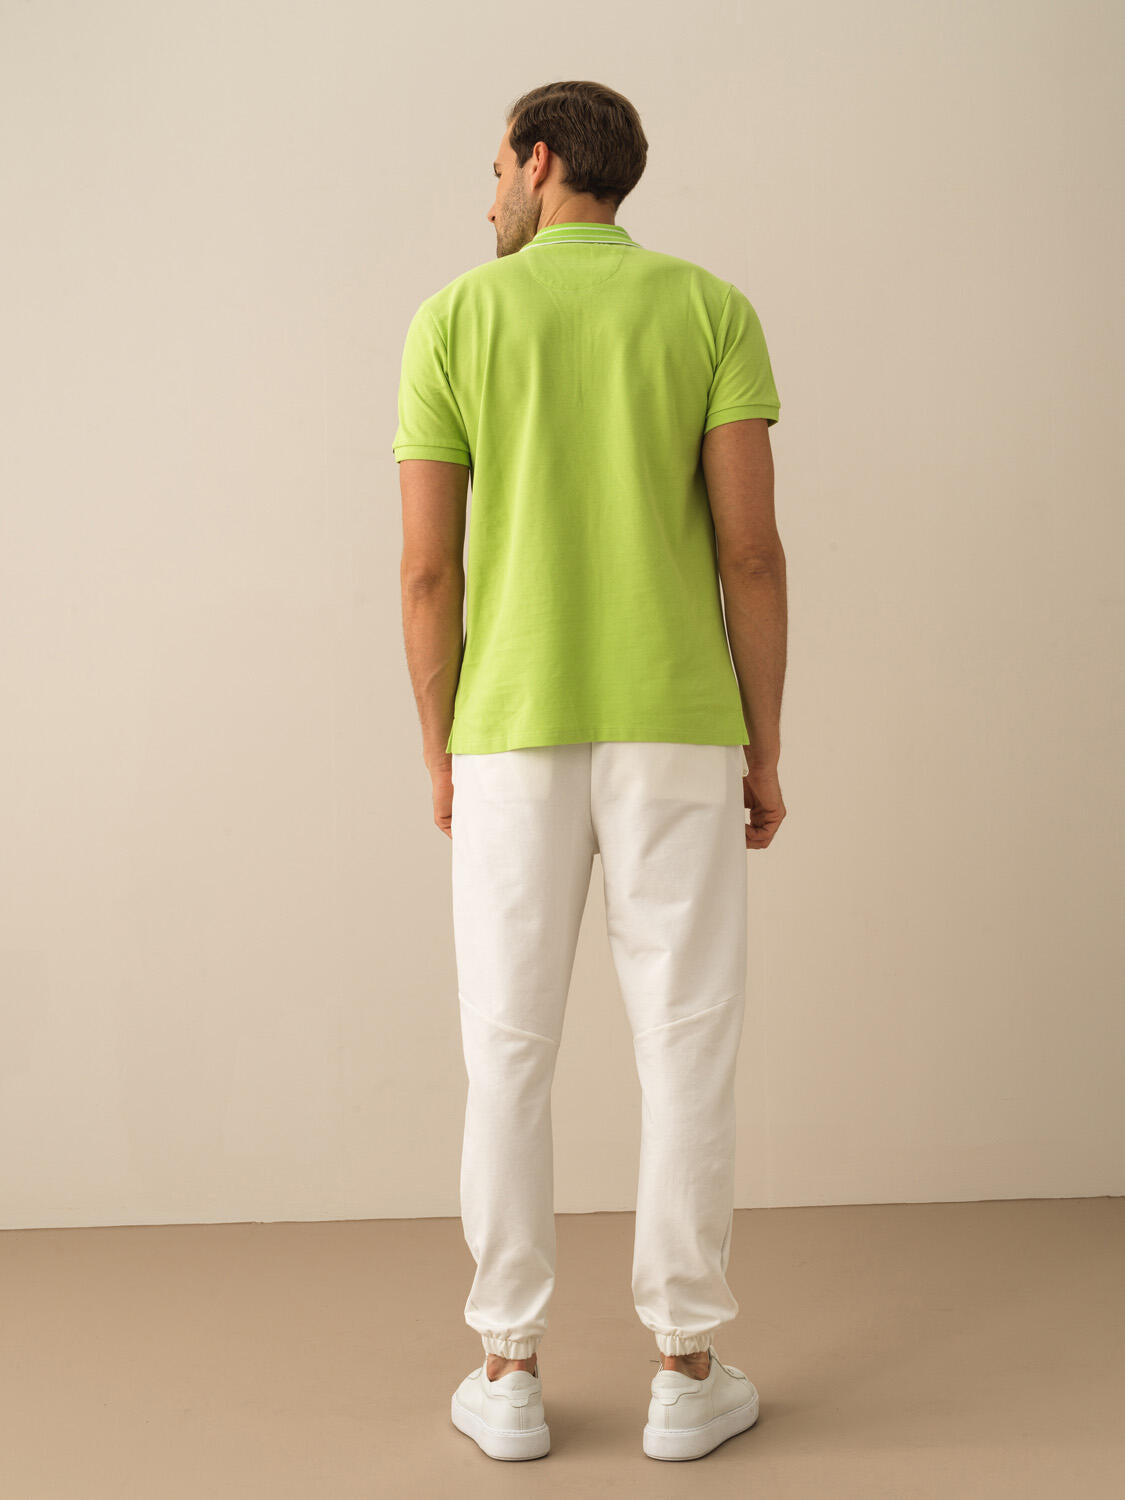 Men Half-Zipped Polo In Green And White